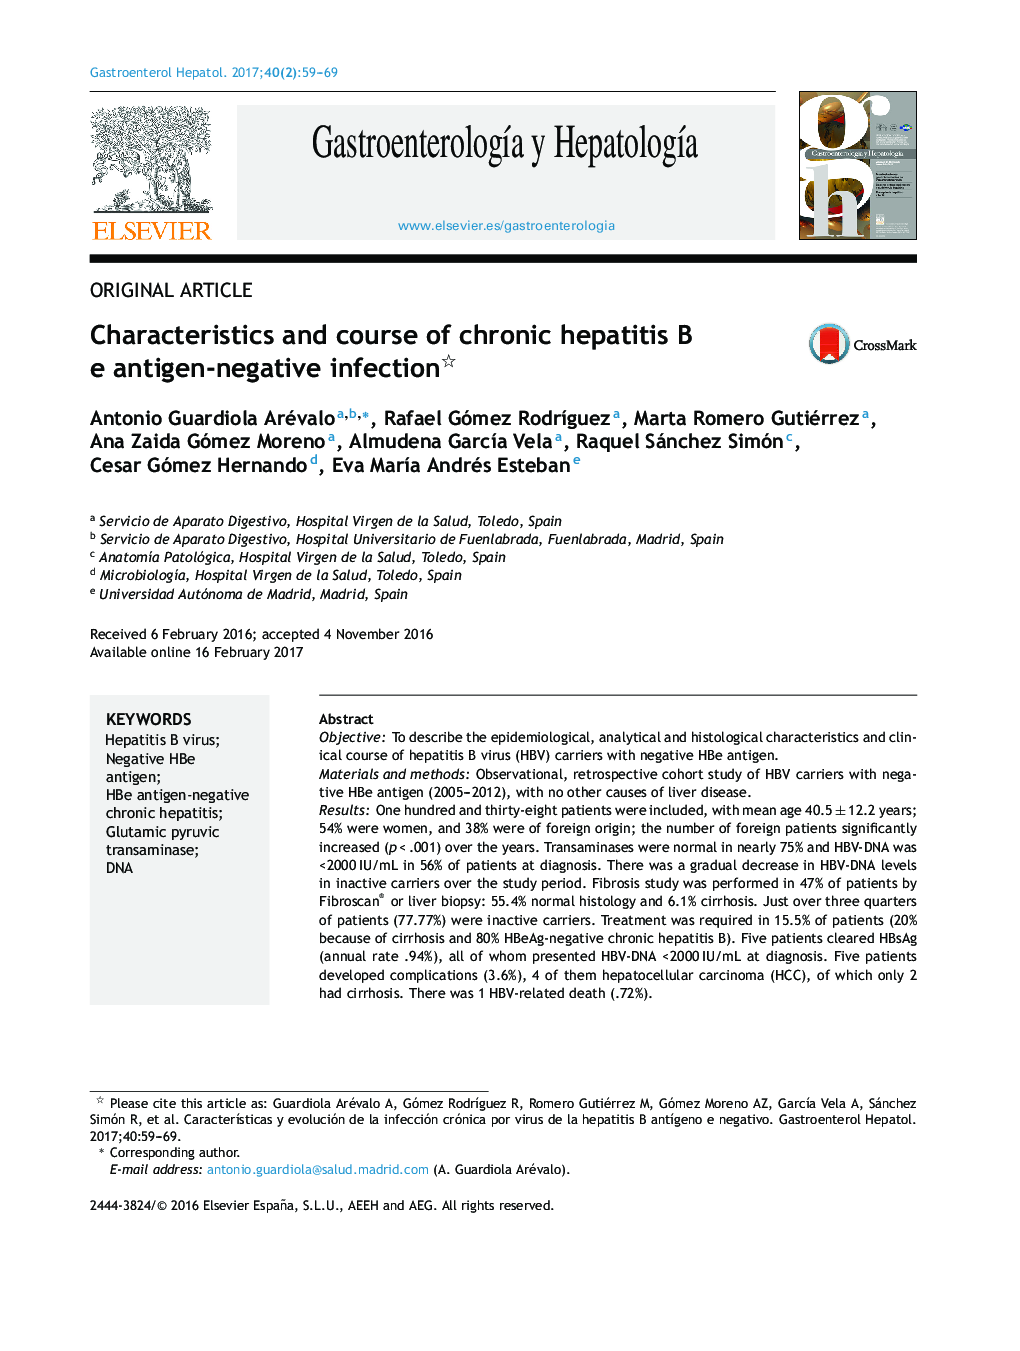 Characteristics and course of chronic hepatitis B e antigen-negative infection